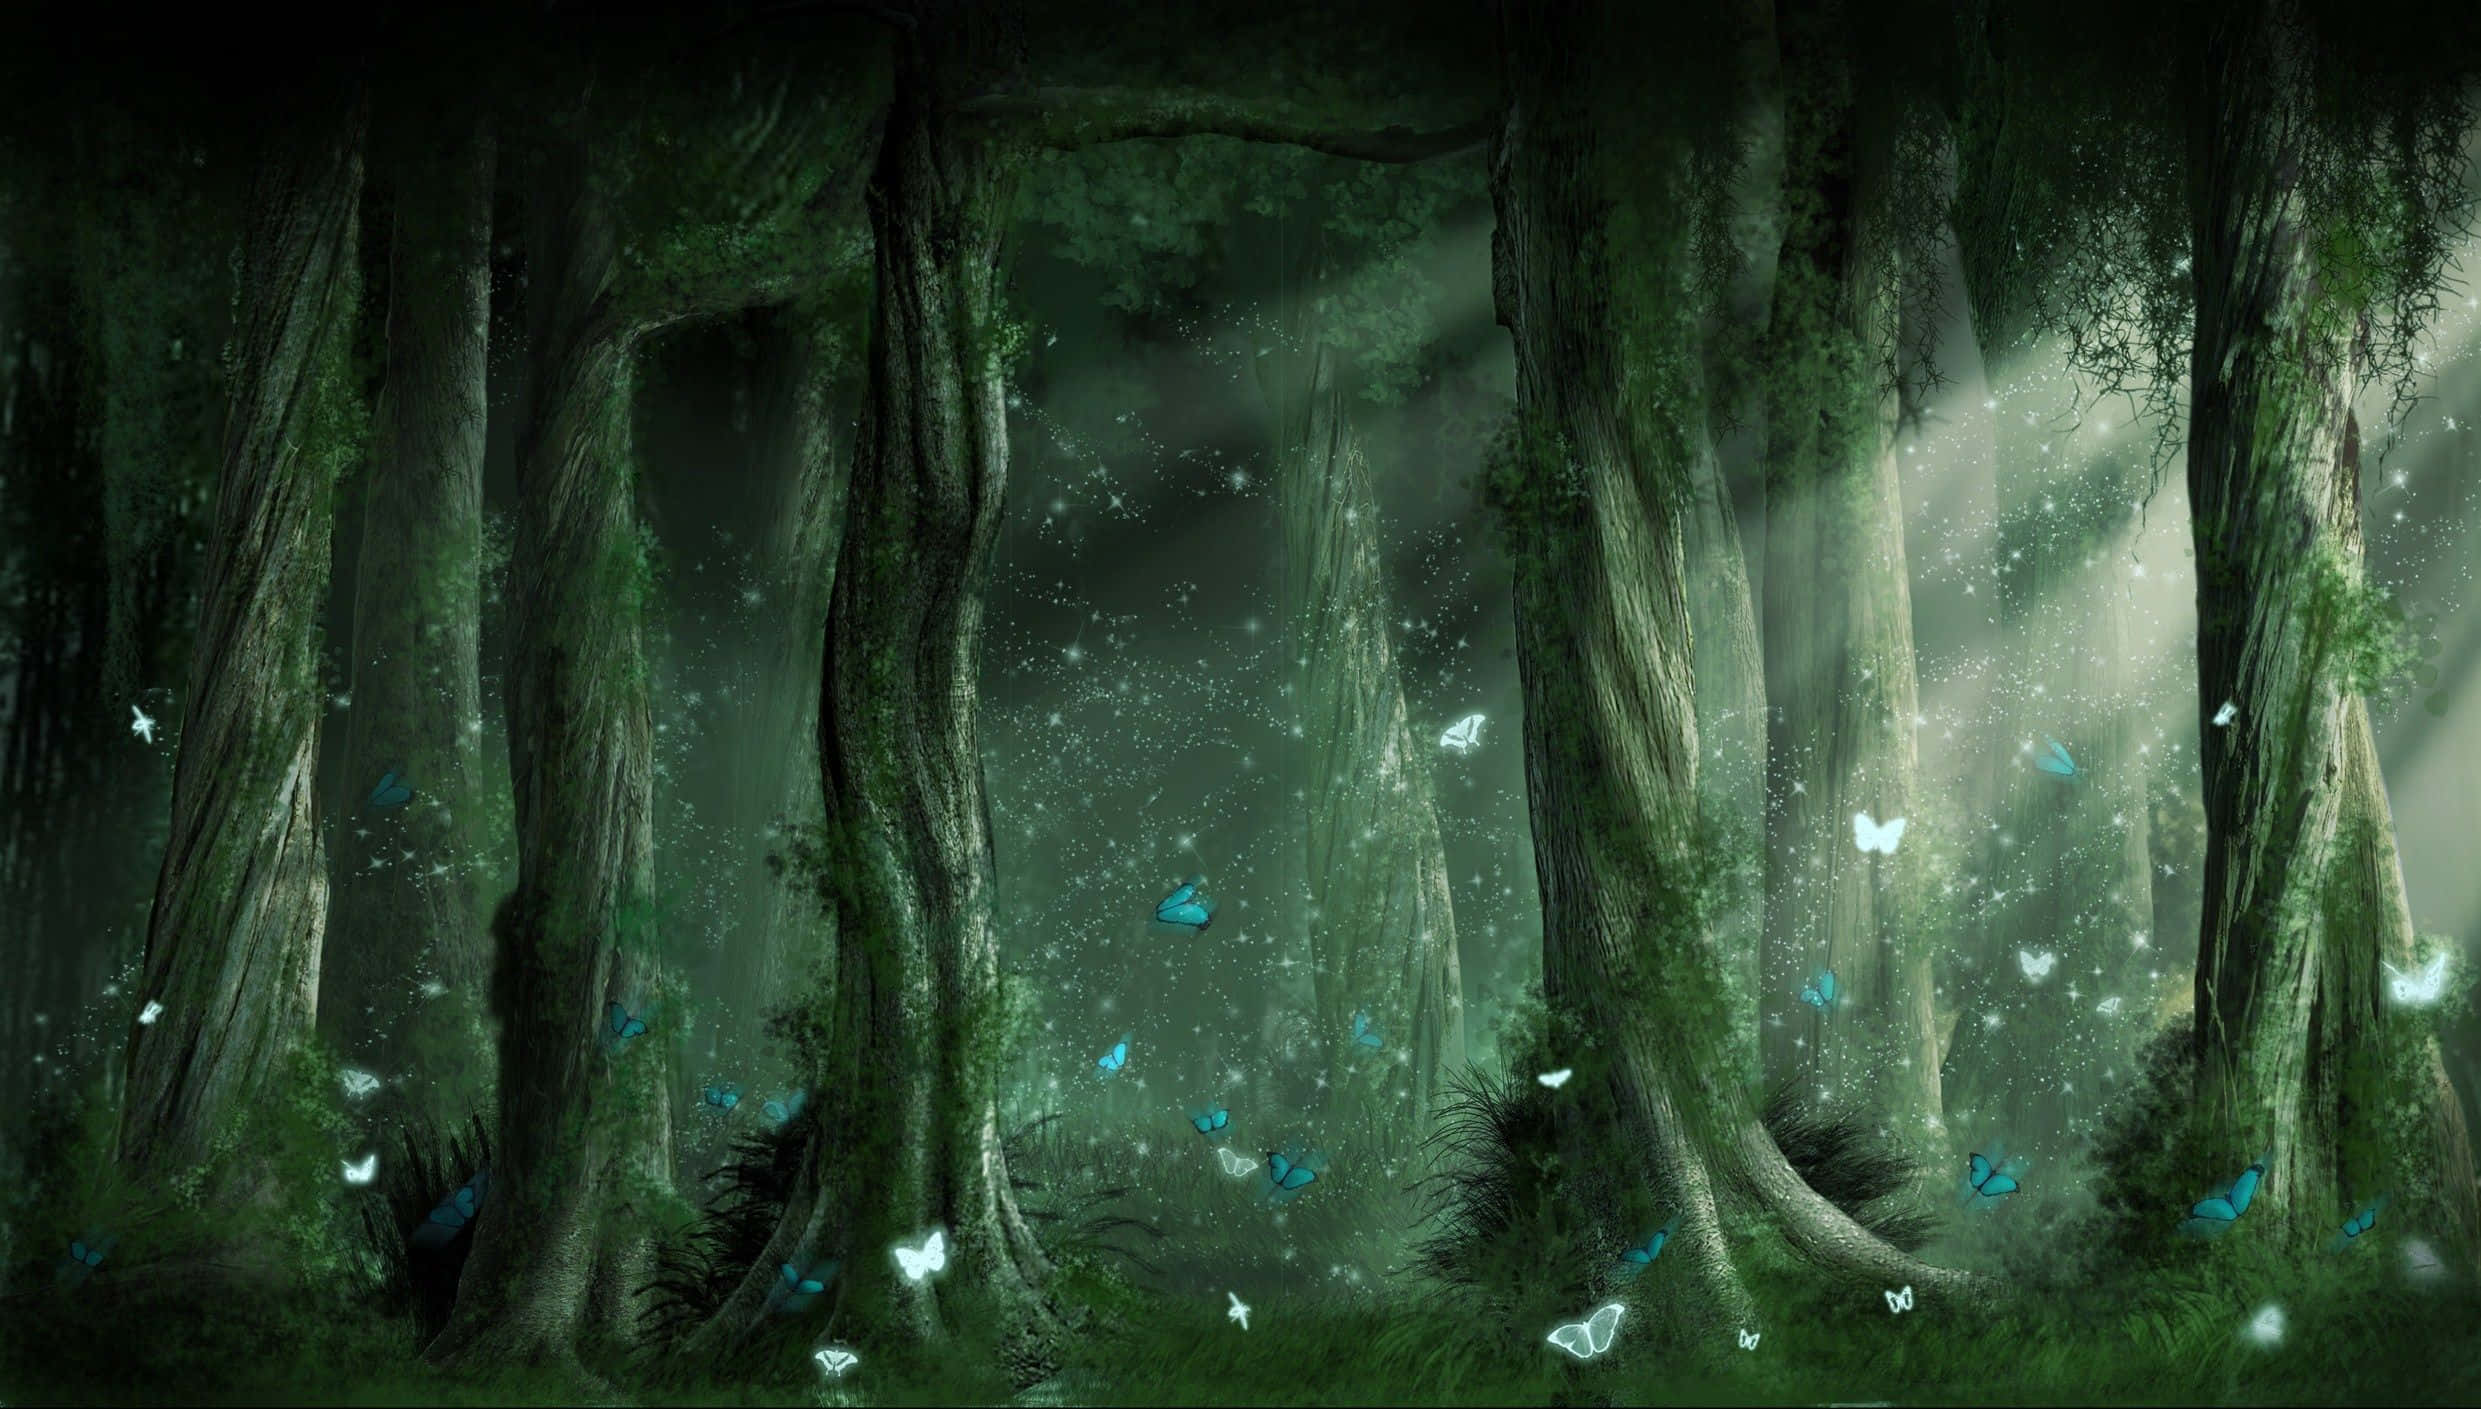 "Welcome to the Magical Forest, Where Anything is Possible"